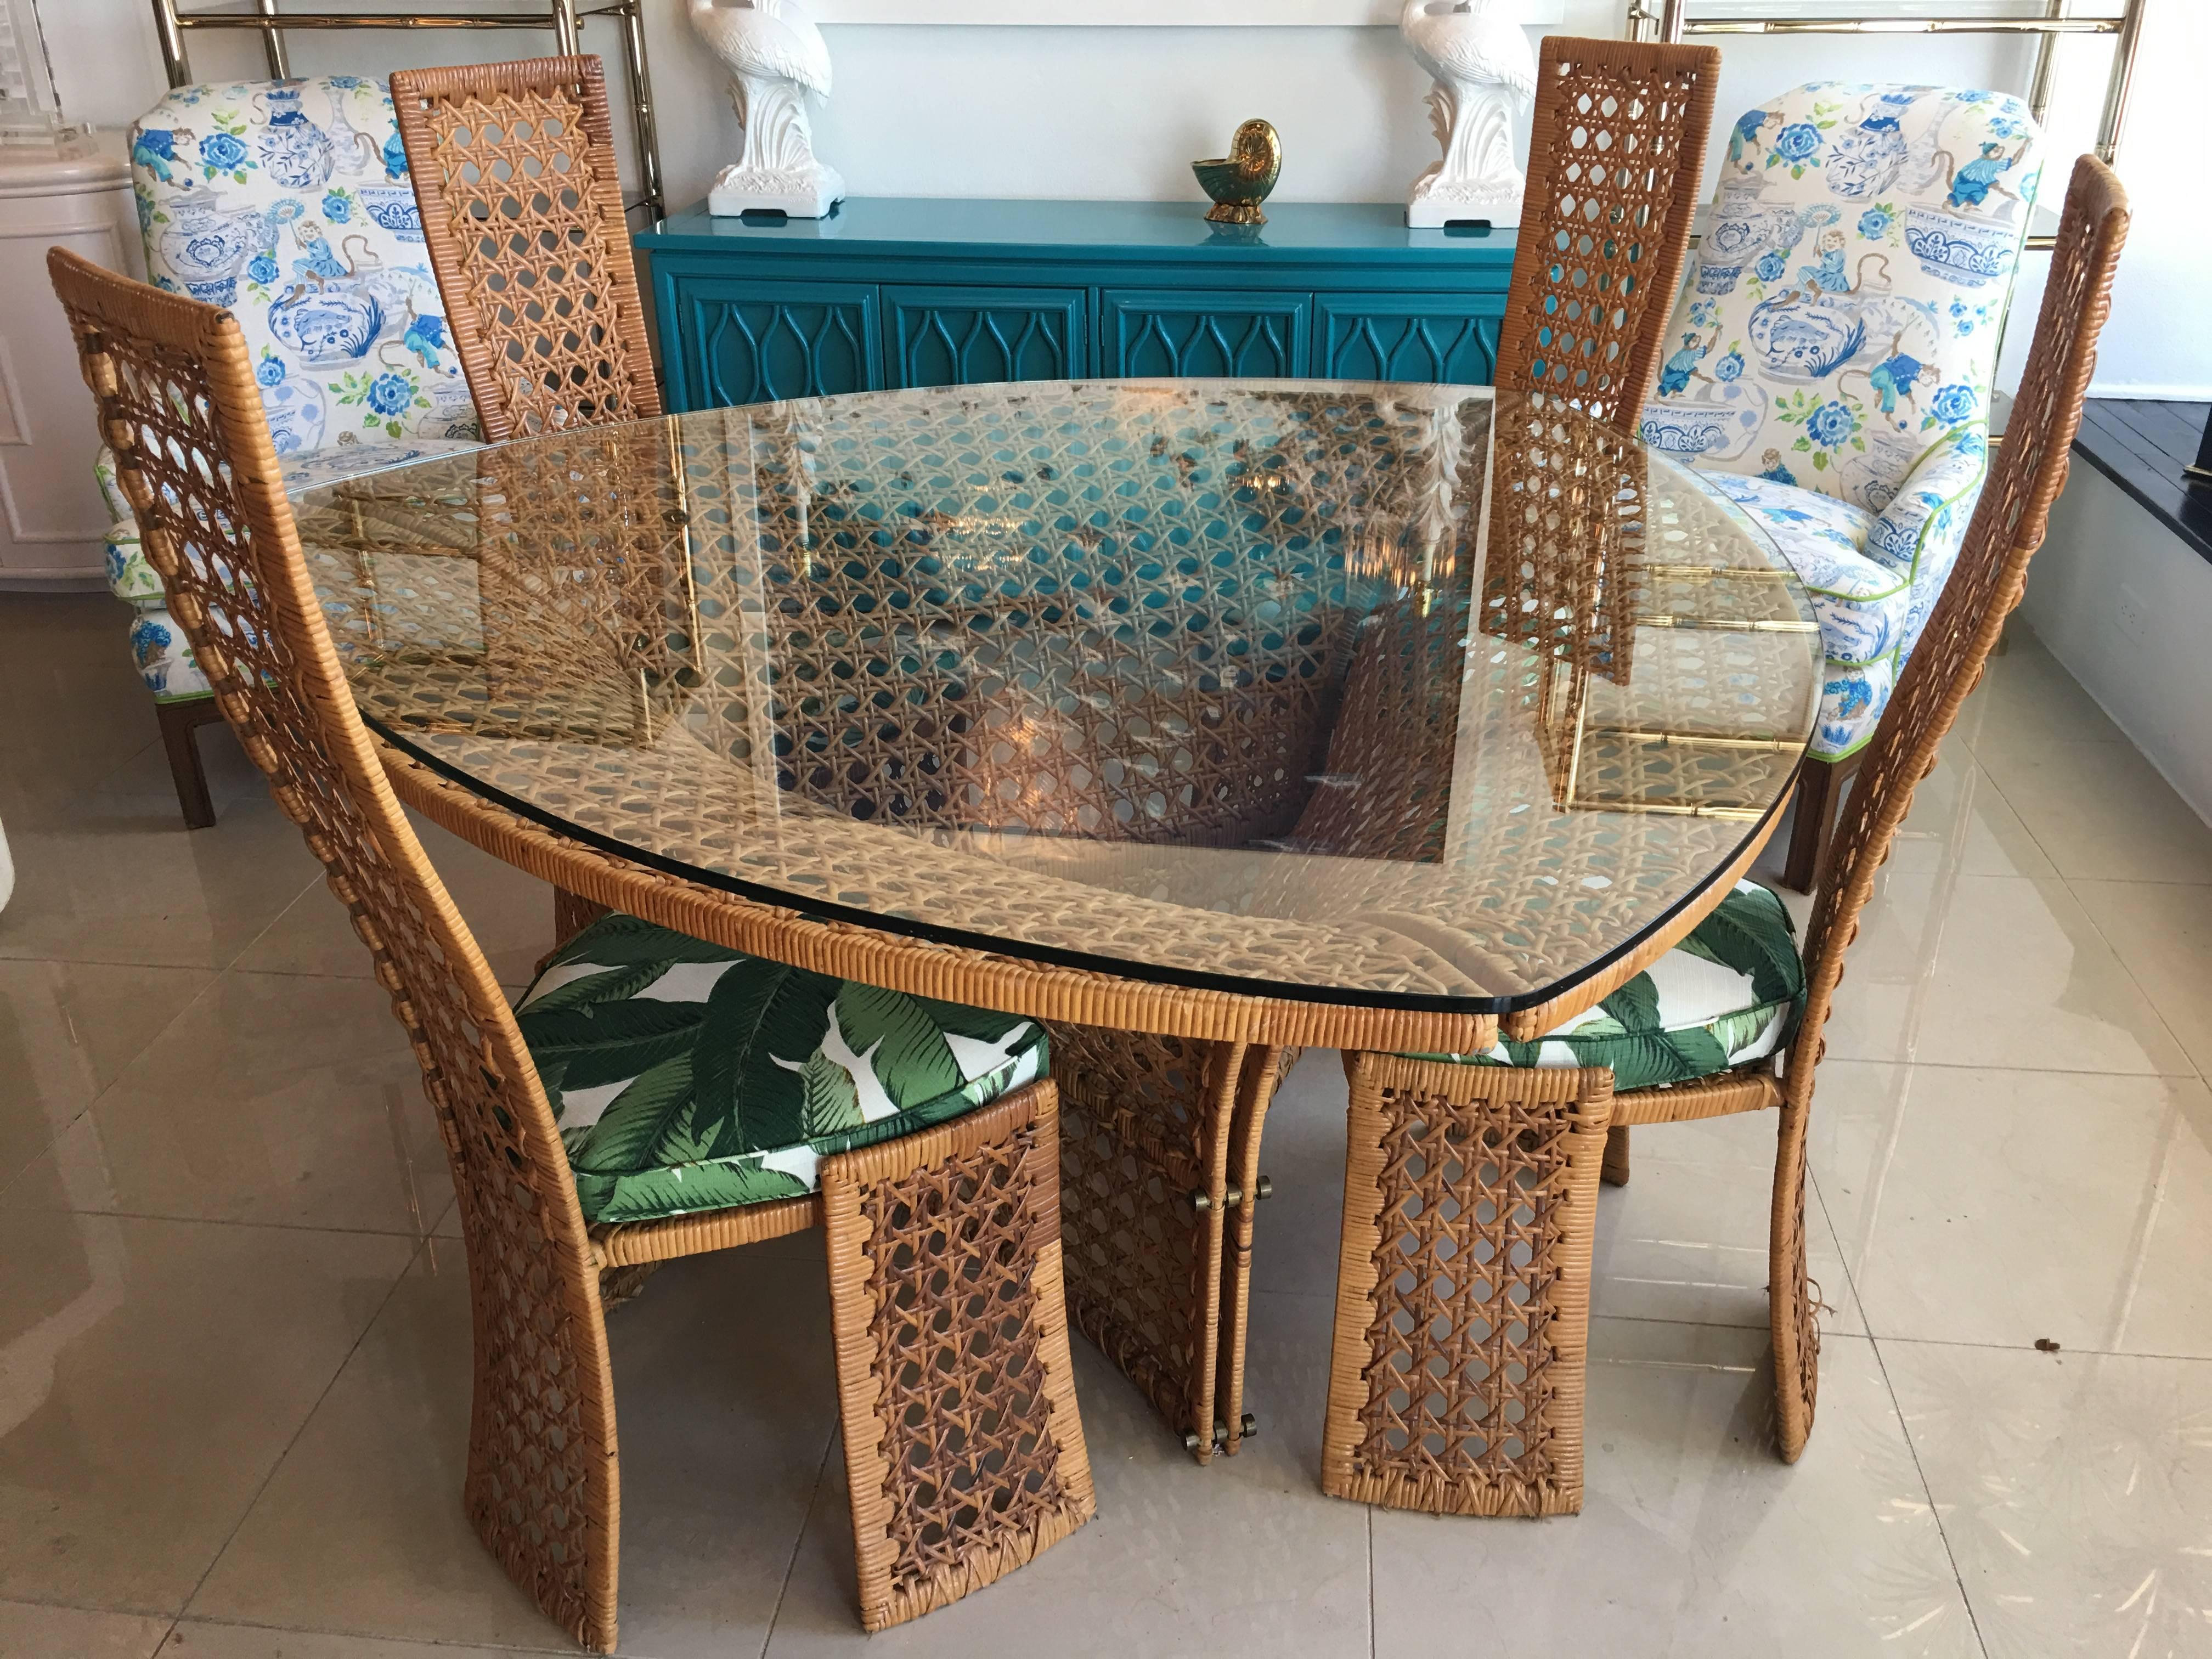 Mid-20th Century Danny Ho Fong Dining Table Set Four Side Chairs Rattan Wicker Tropical Bamboo